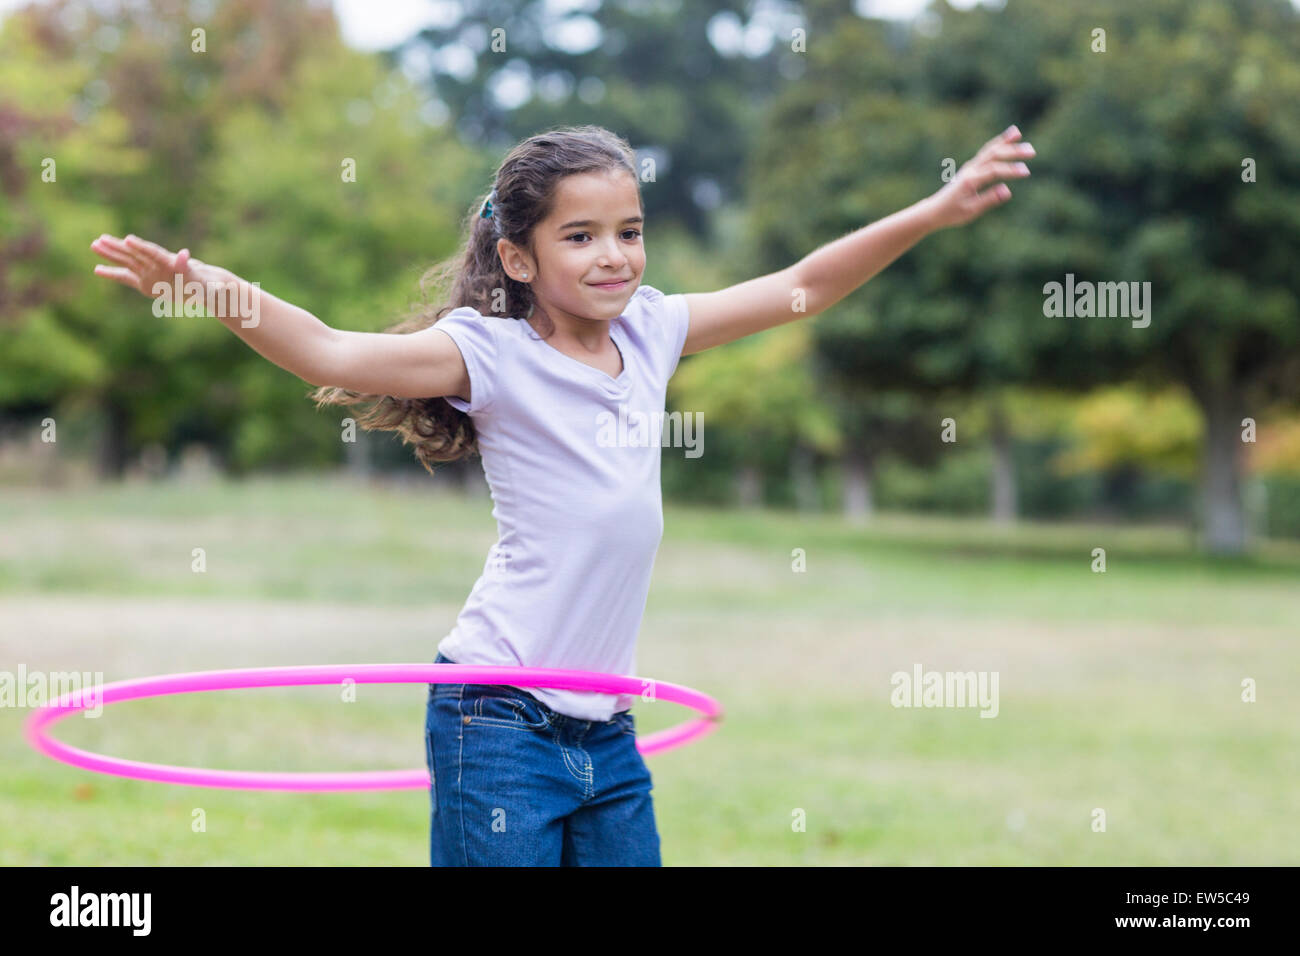 happy girl playing with hula hoops Stock Photo